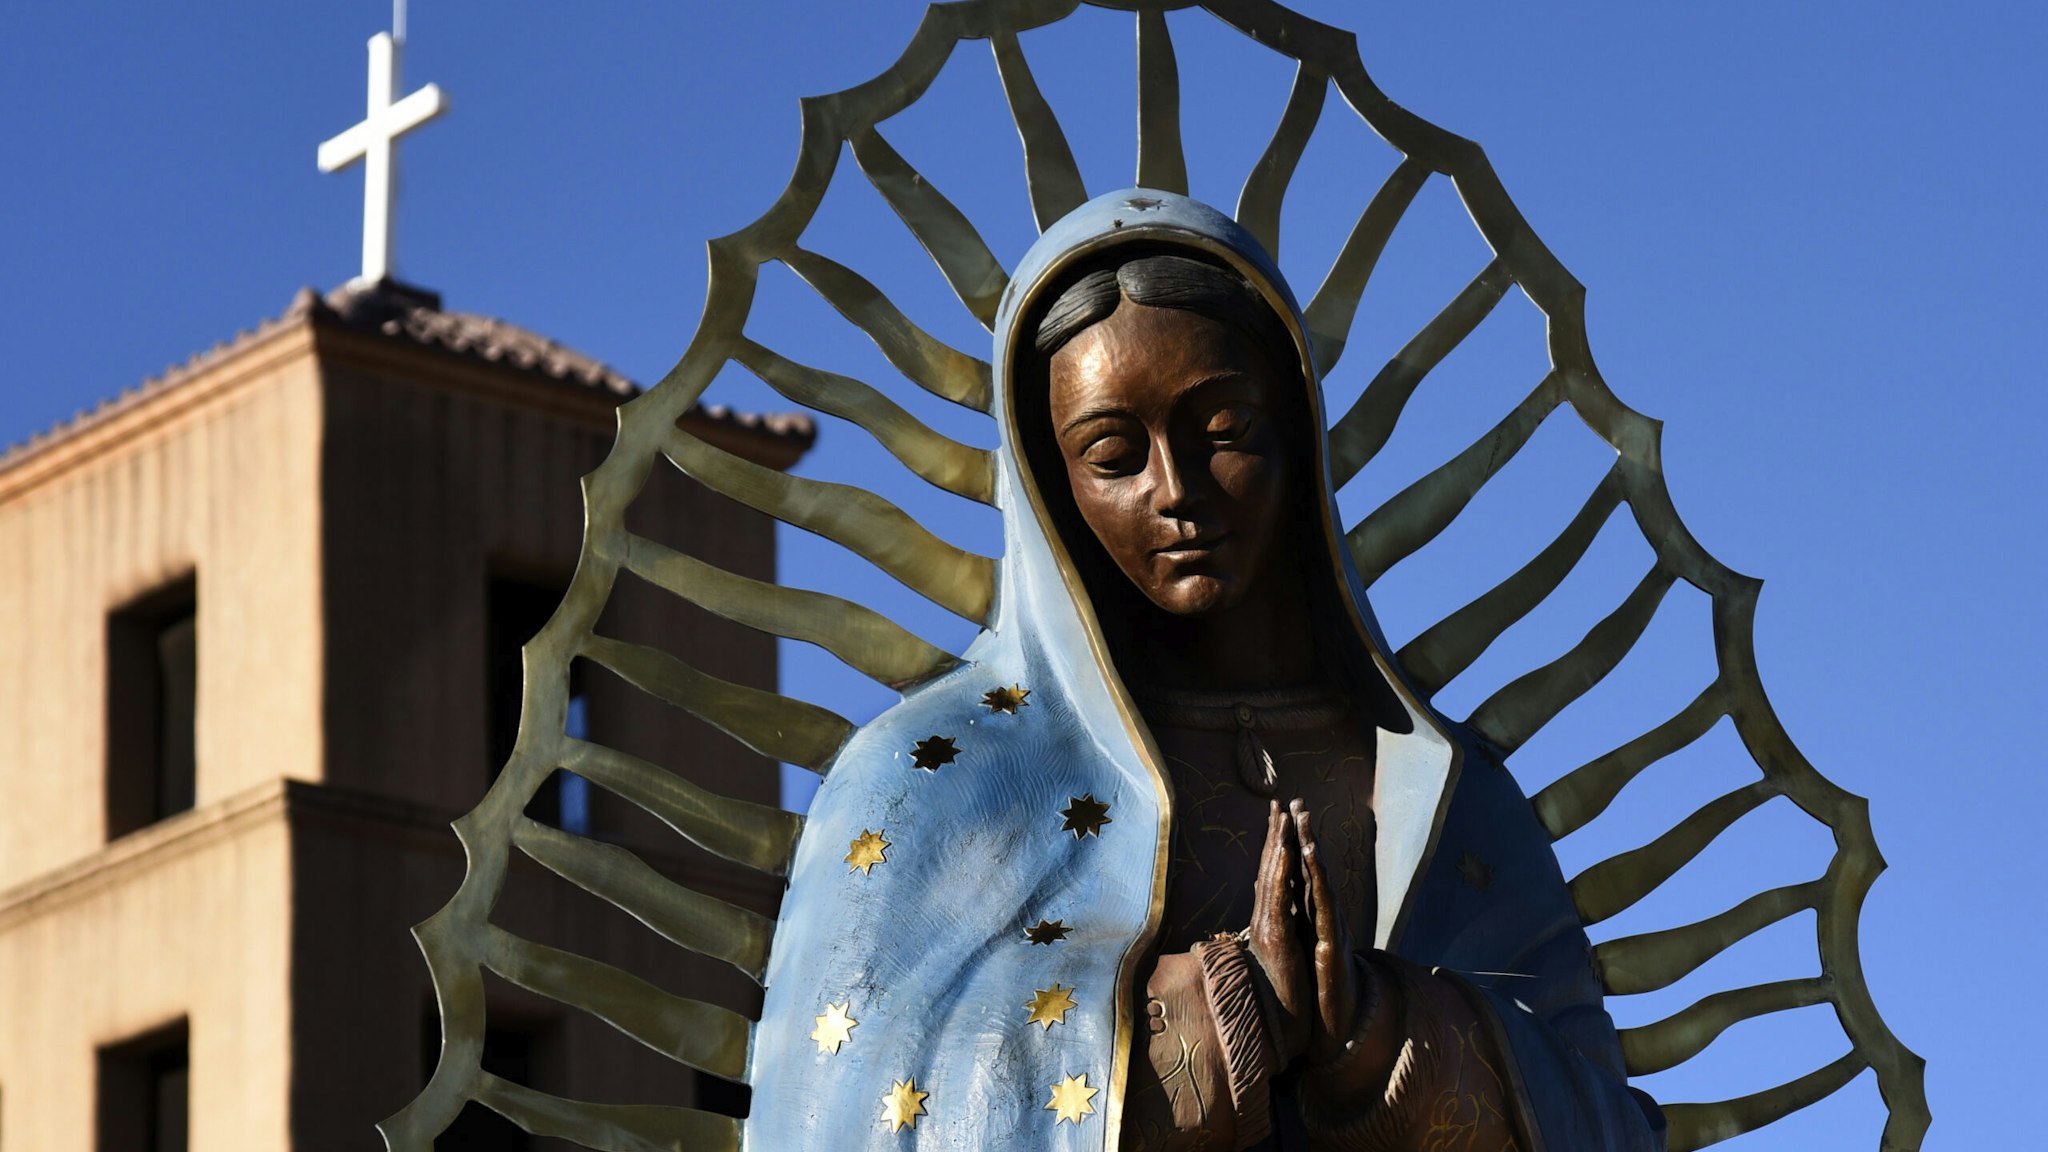 SANTA FE, NM - NOVEMBER 11, 2017: A bronze statue of Our Lady of Guadalupe stands beside the historic Santuario de Guadalupe in Santa Fe, New Mexico. Our Lady of Guadalupe (The Shrine of Our Lady of Guadalupe) was built in the 1770s. It is the oldest standing shrine in the United States. (Photo by Robert Alexander/Getty Images)